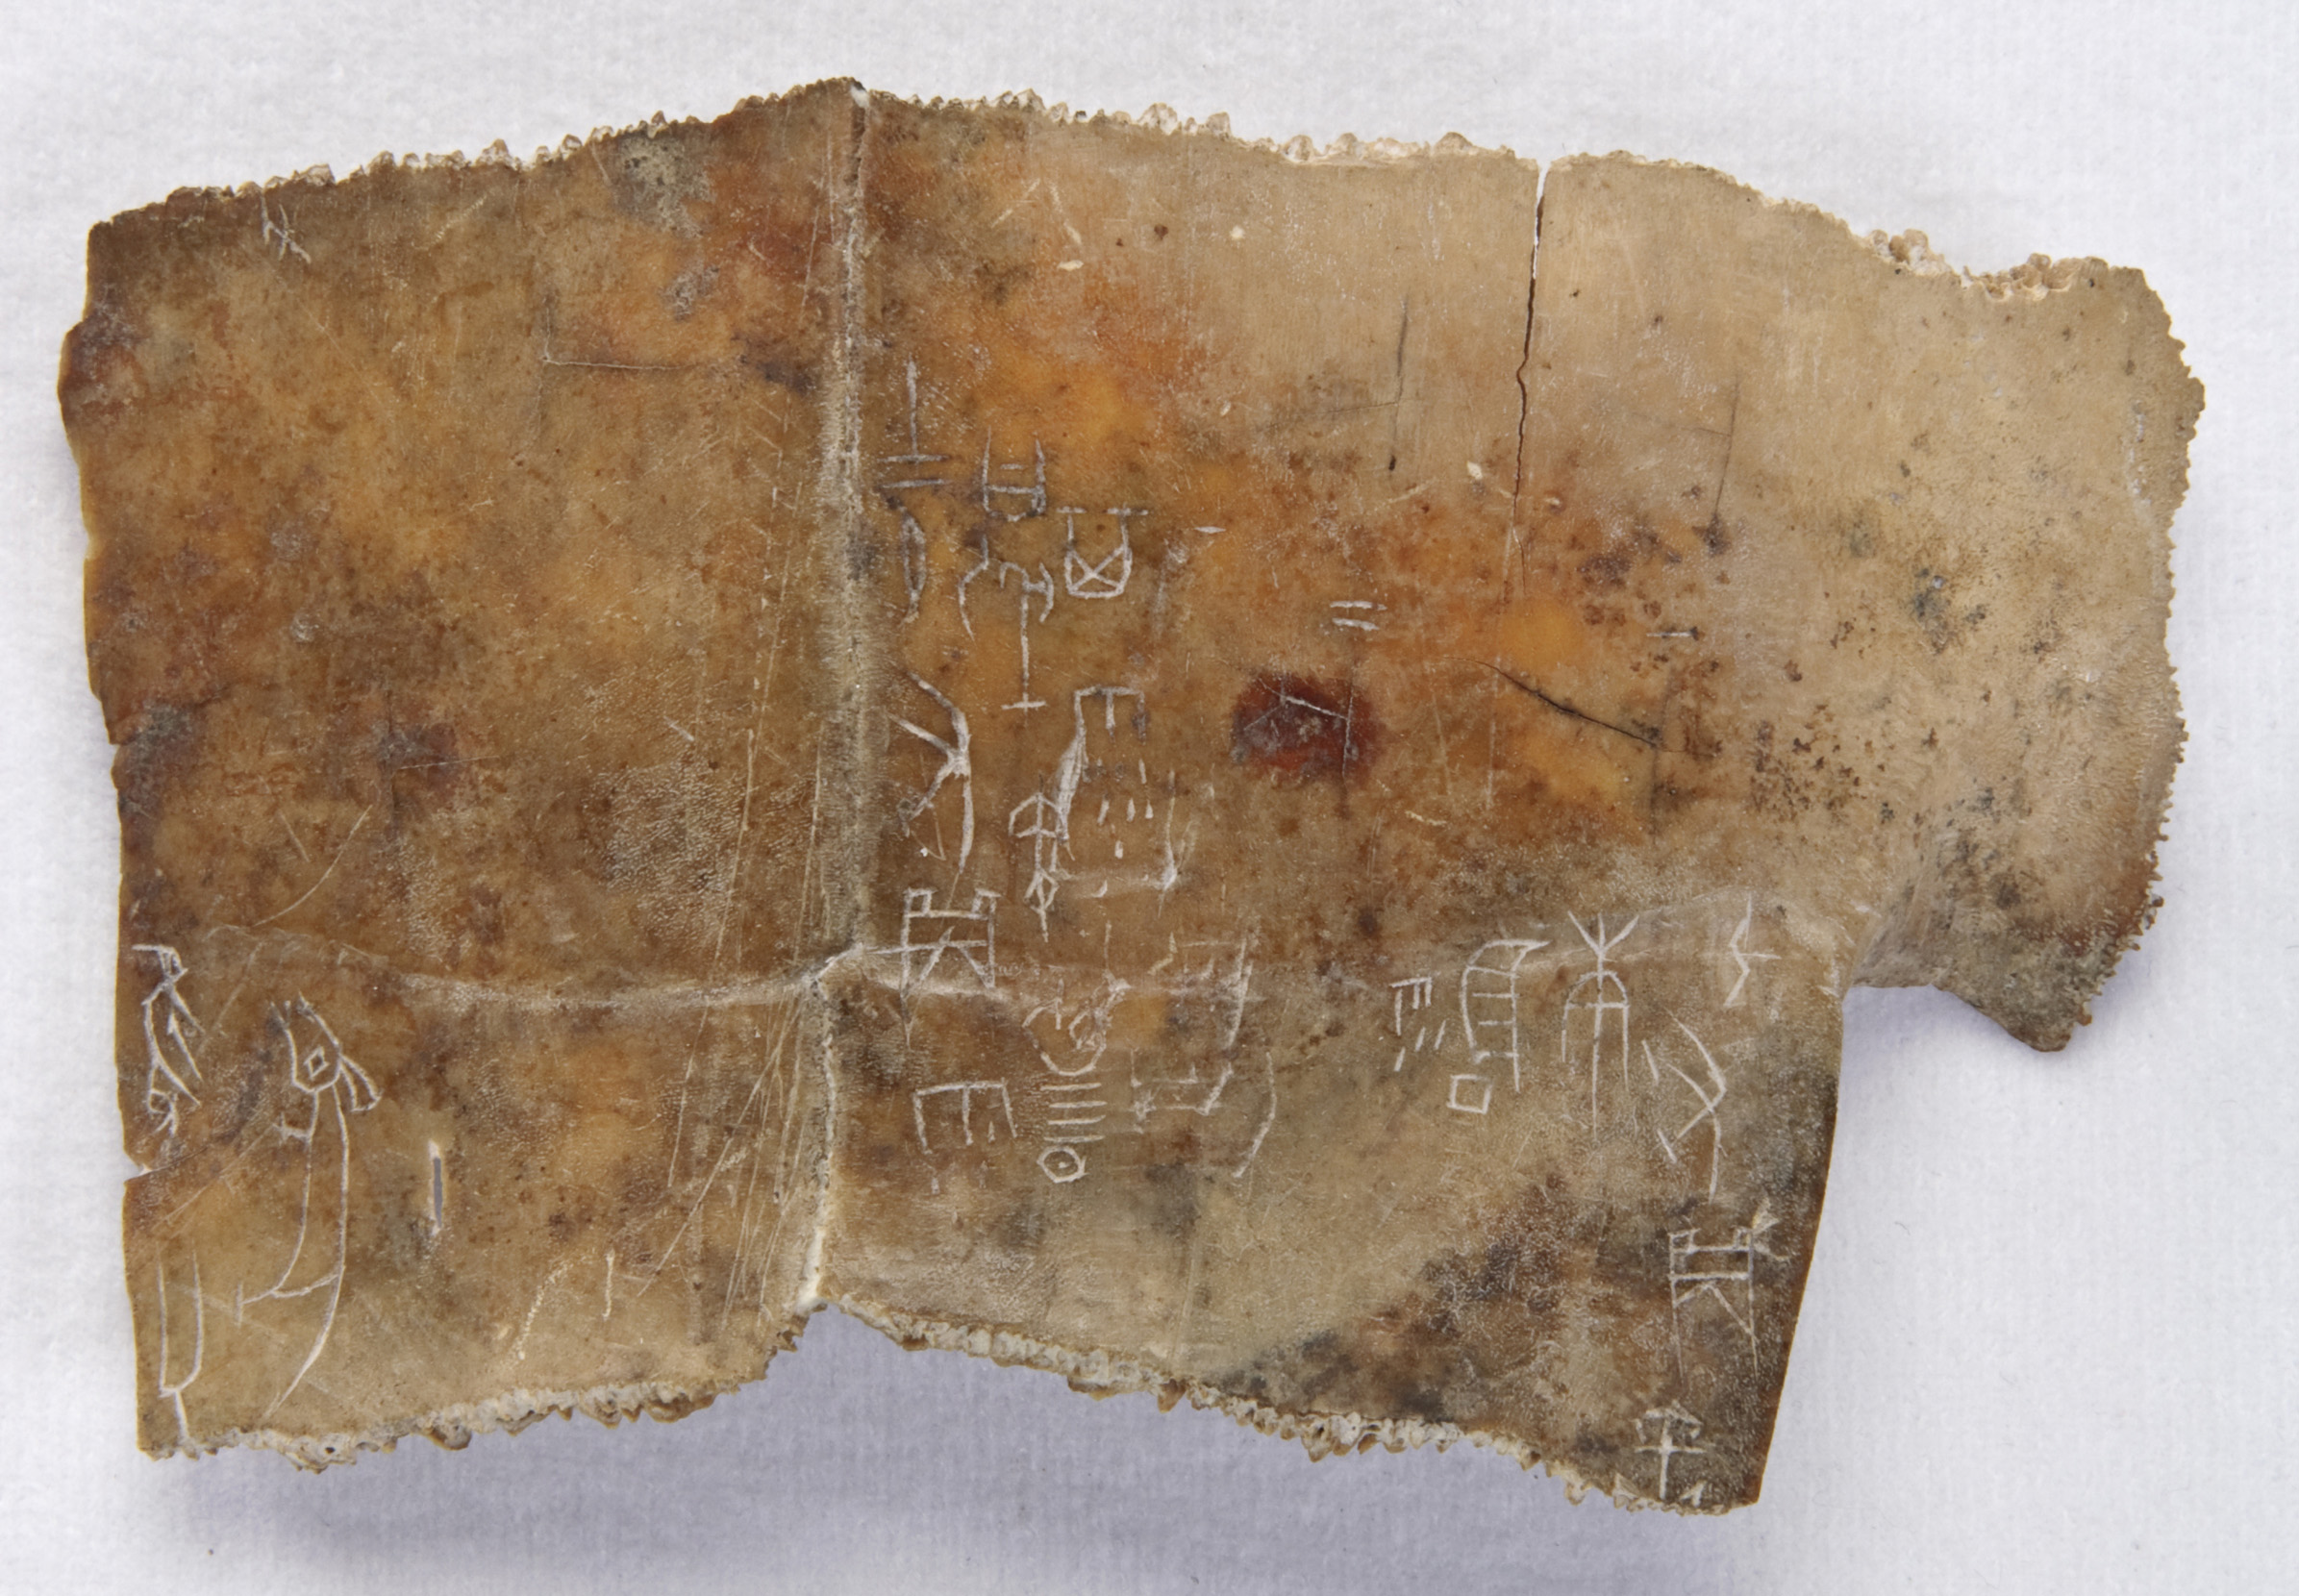 Inscribed tortoise carapace (“oracle bone”)